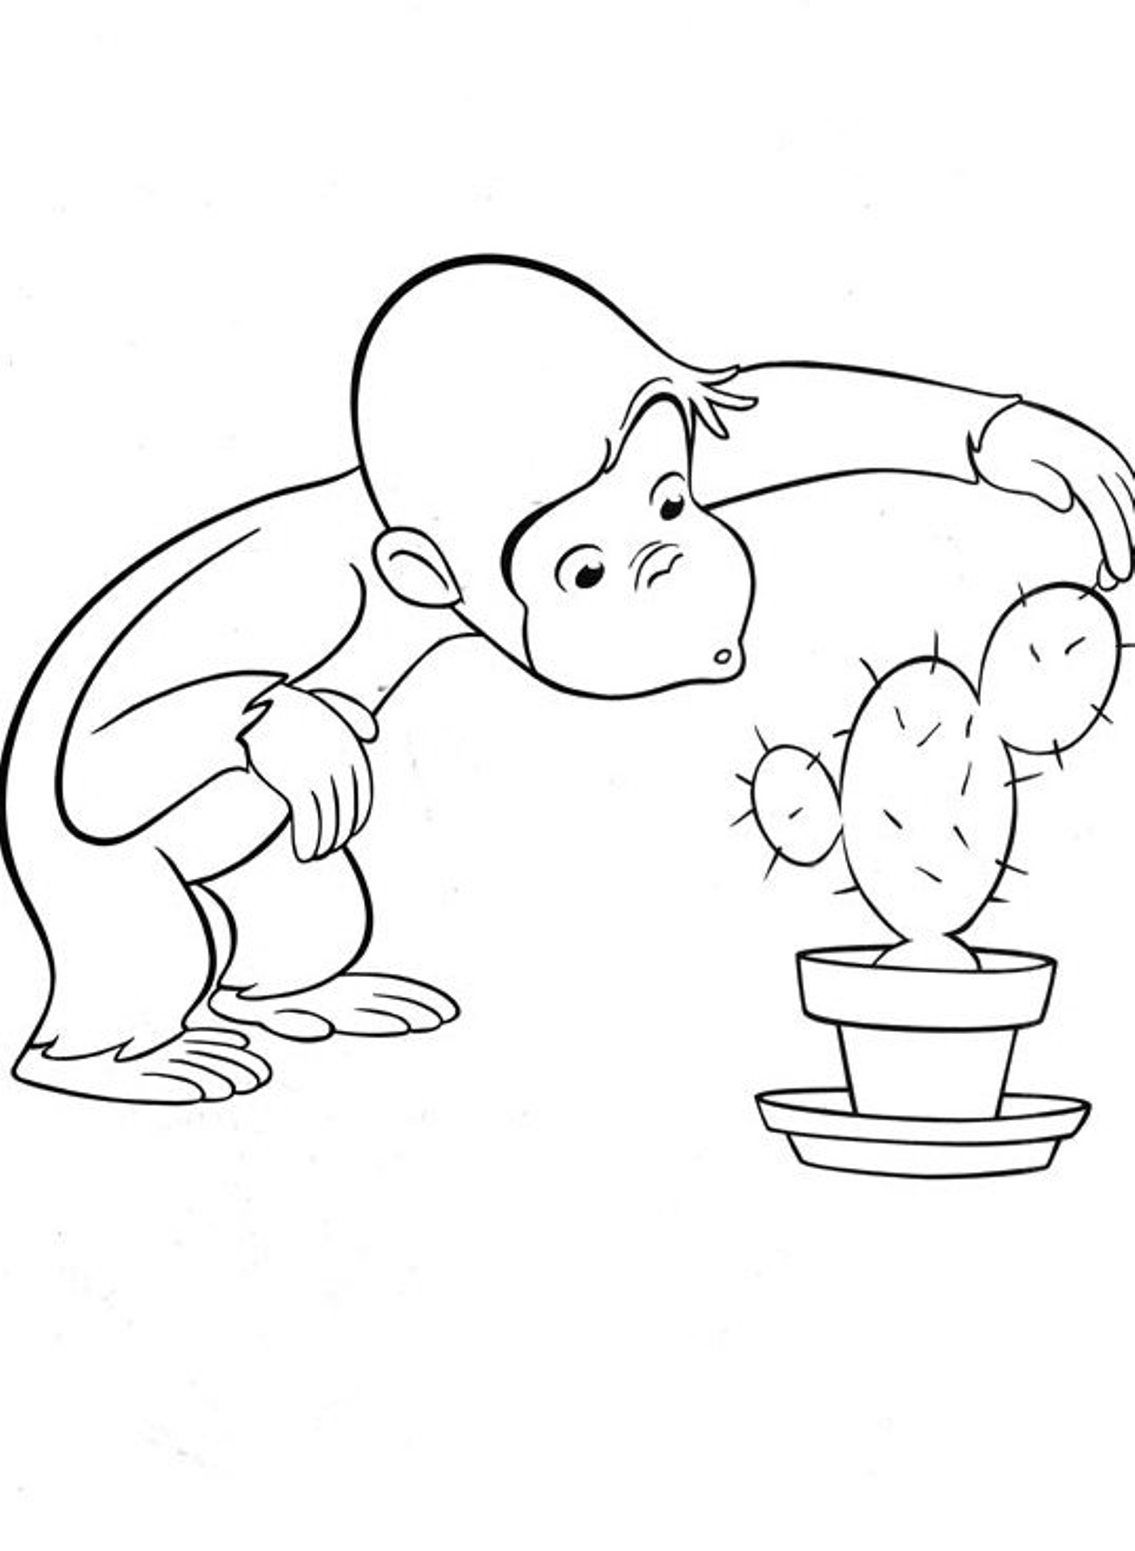 Curious George Coloring Pages Free Printable | Cartoon Coloring ...